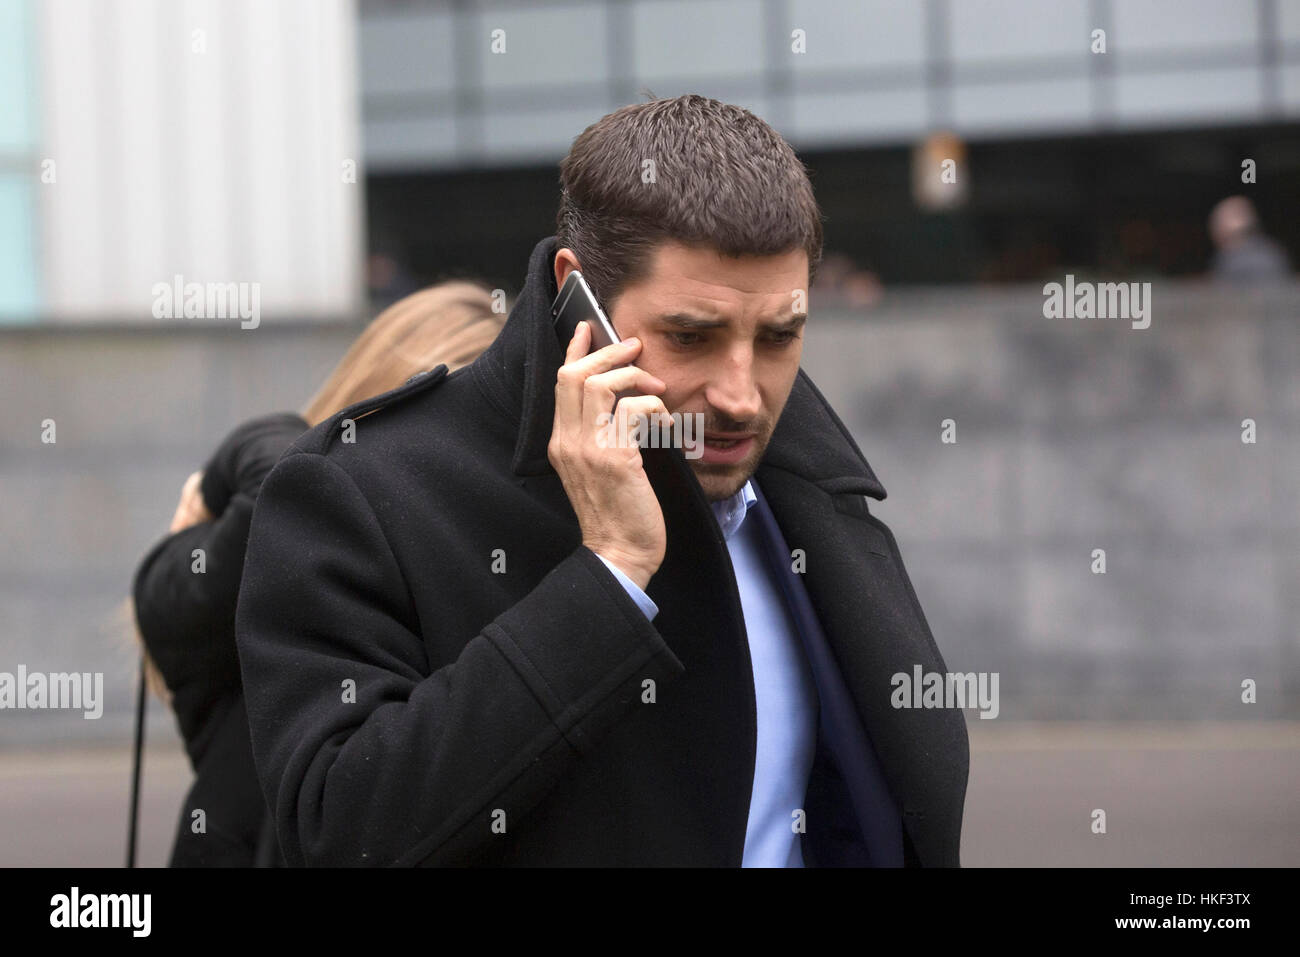 Carl Hirschmann arrives at Southwark Crown Court, in central London, where he is accused of assaulting a man at his nightclub the Scotch of St James. Stock Photo